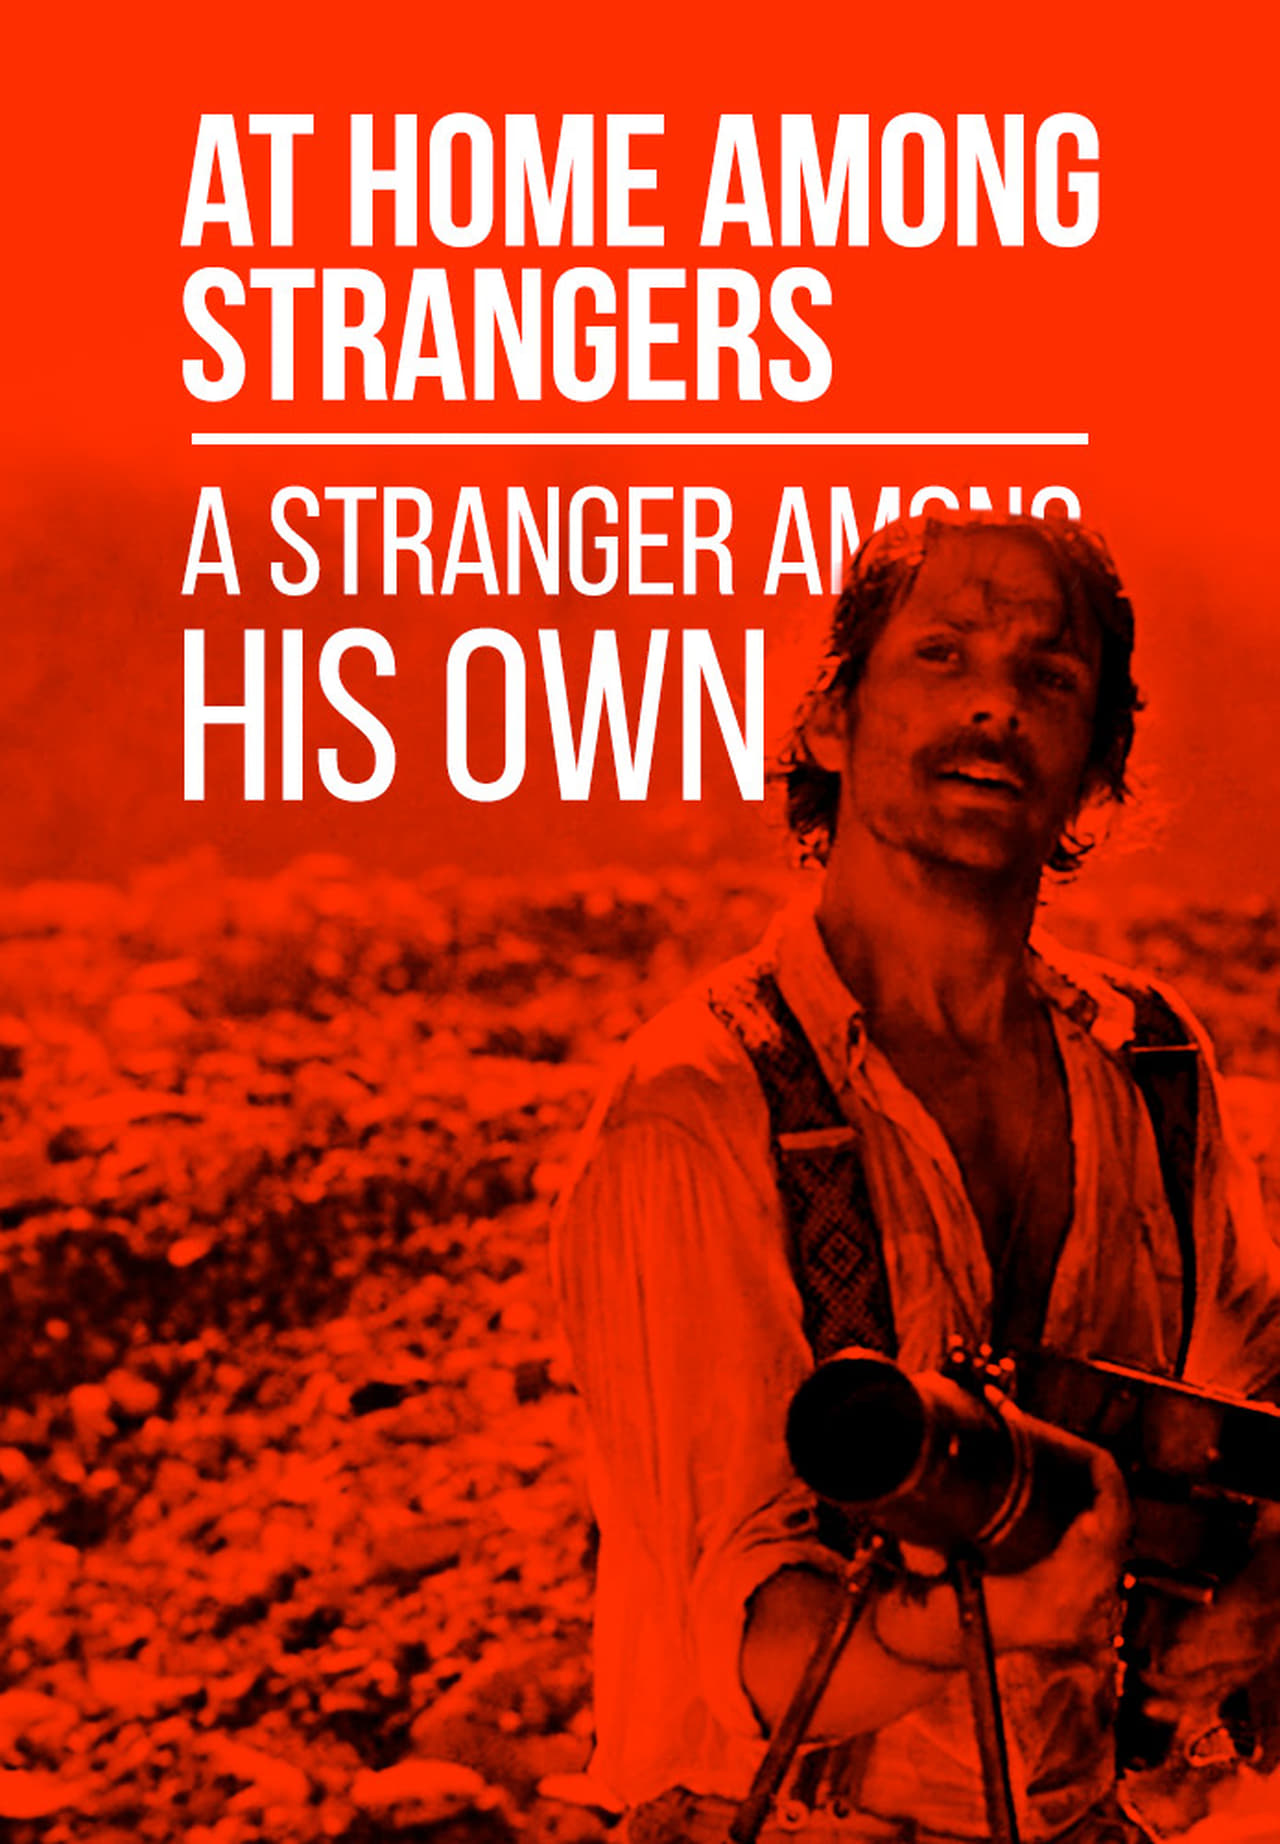 At Home Among Strangers, A Stranger Among His Own (1974)